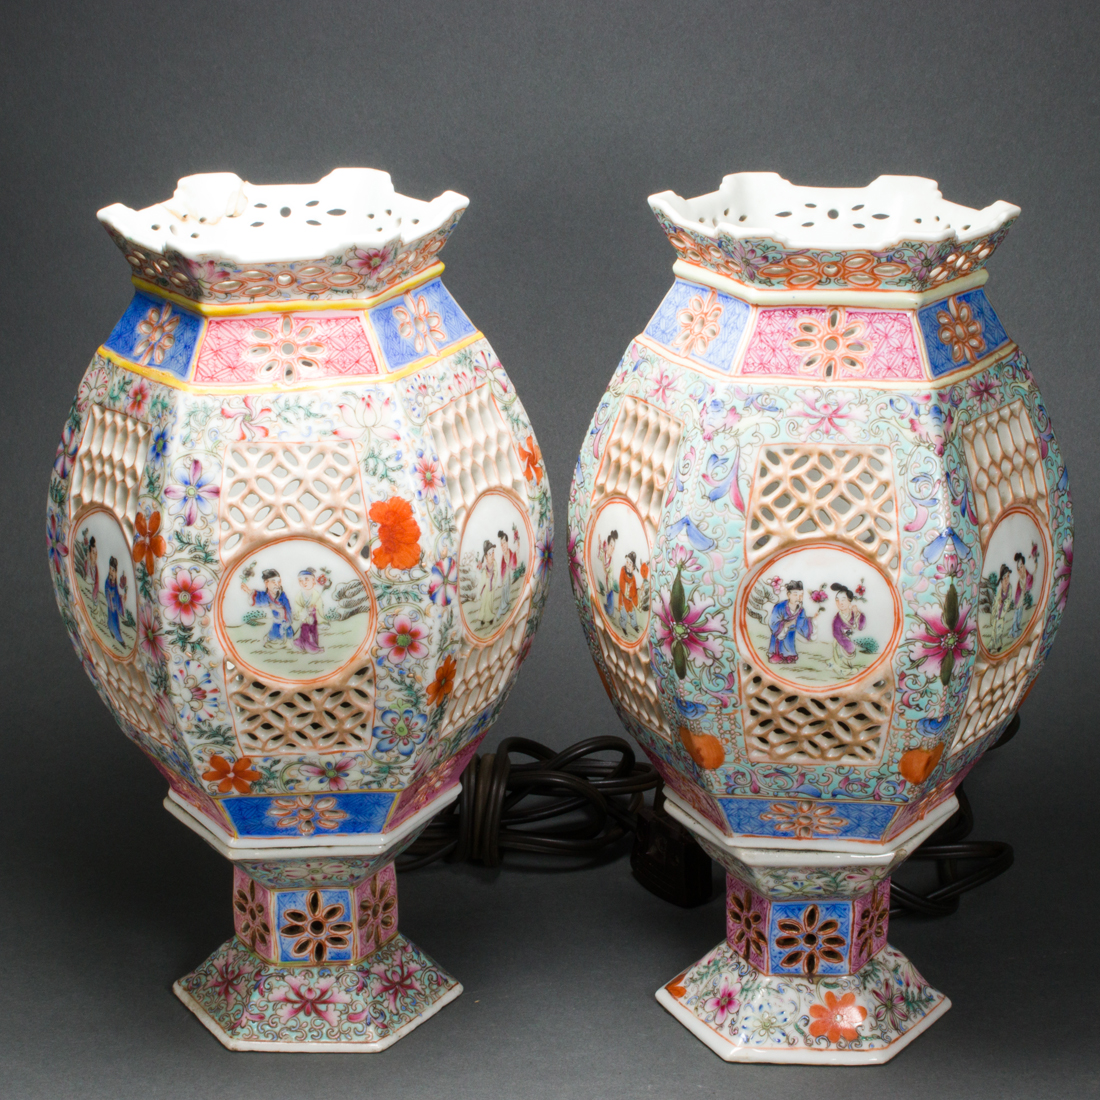 PAIR OF CHINESE FAMILLE ROSE LANTERNS 3a1524